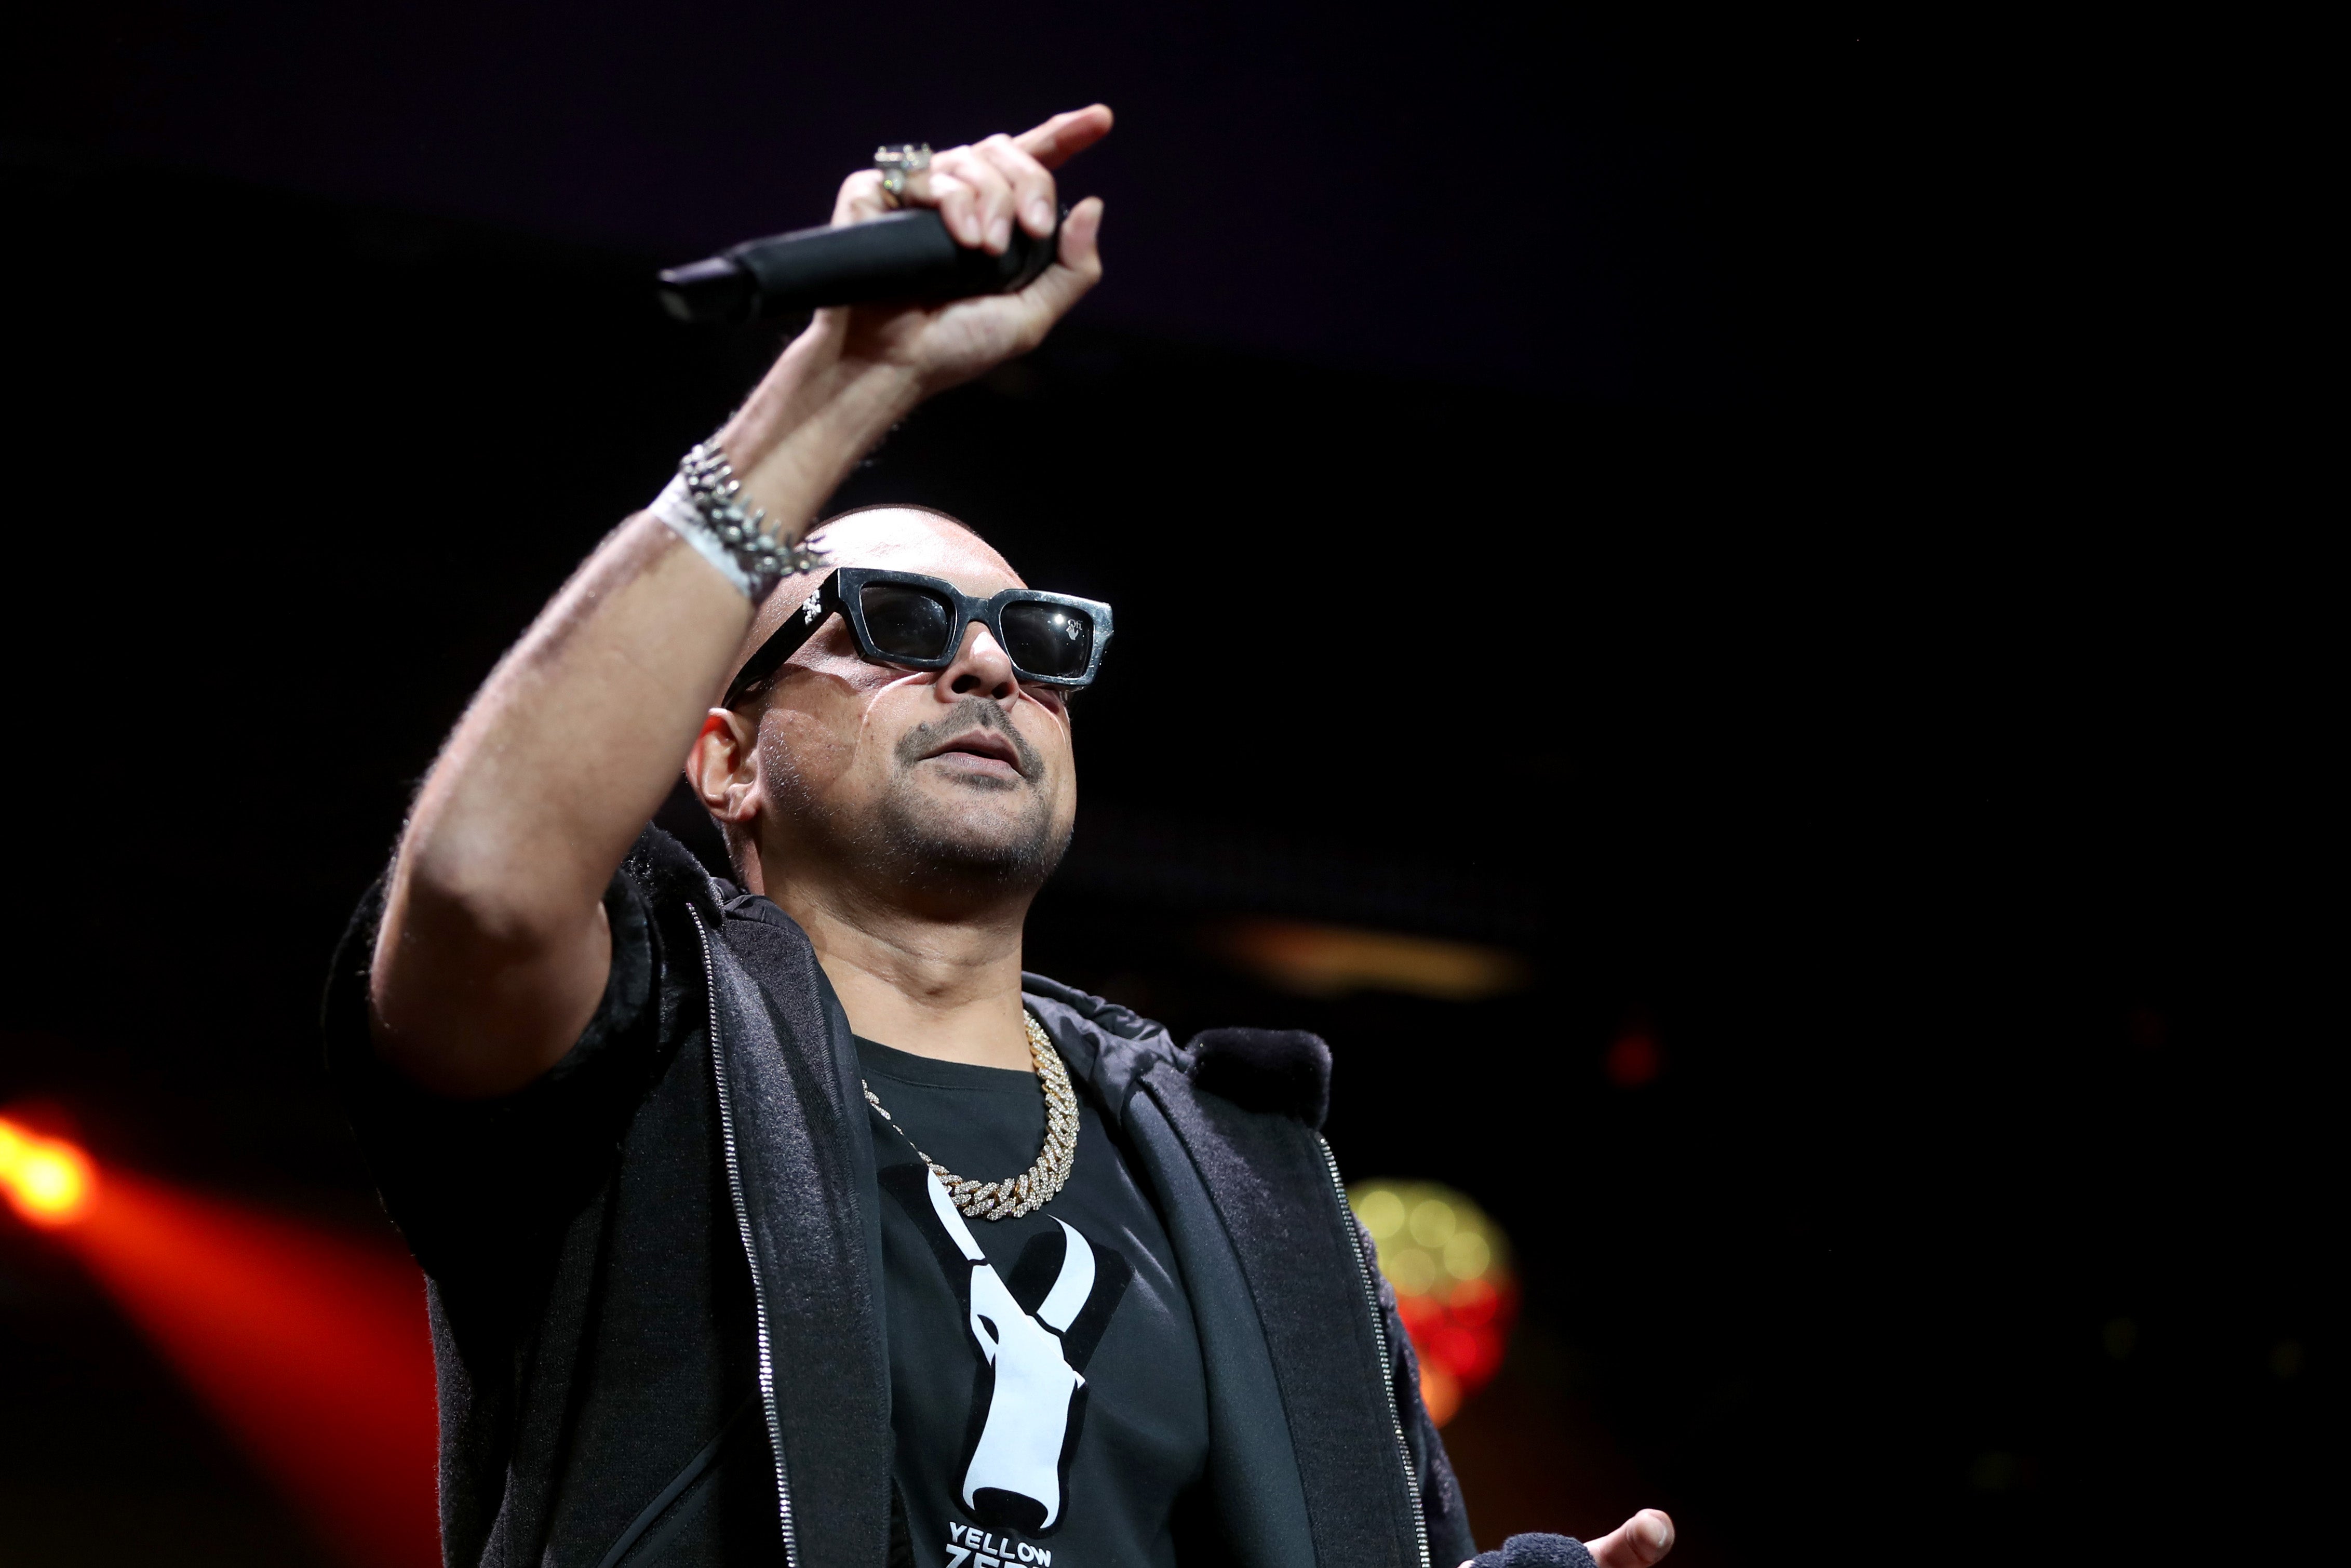 Sean Paul’s UK tour was rescheduled from April 2022